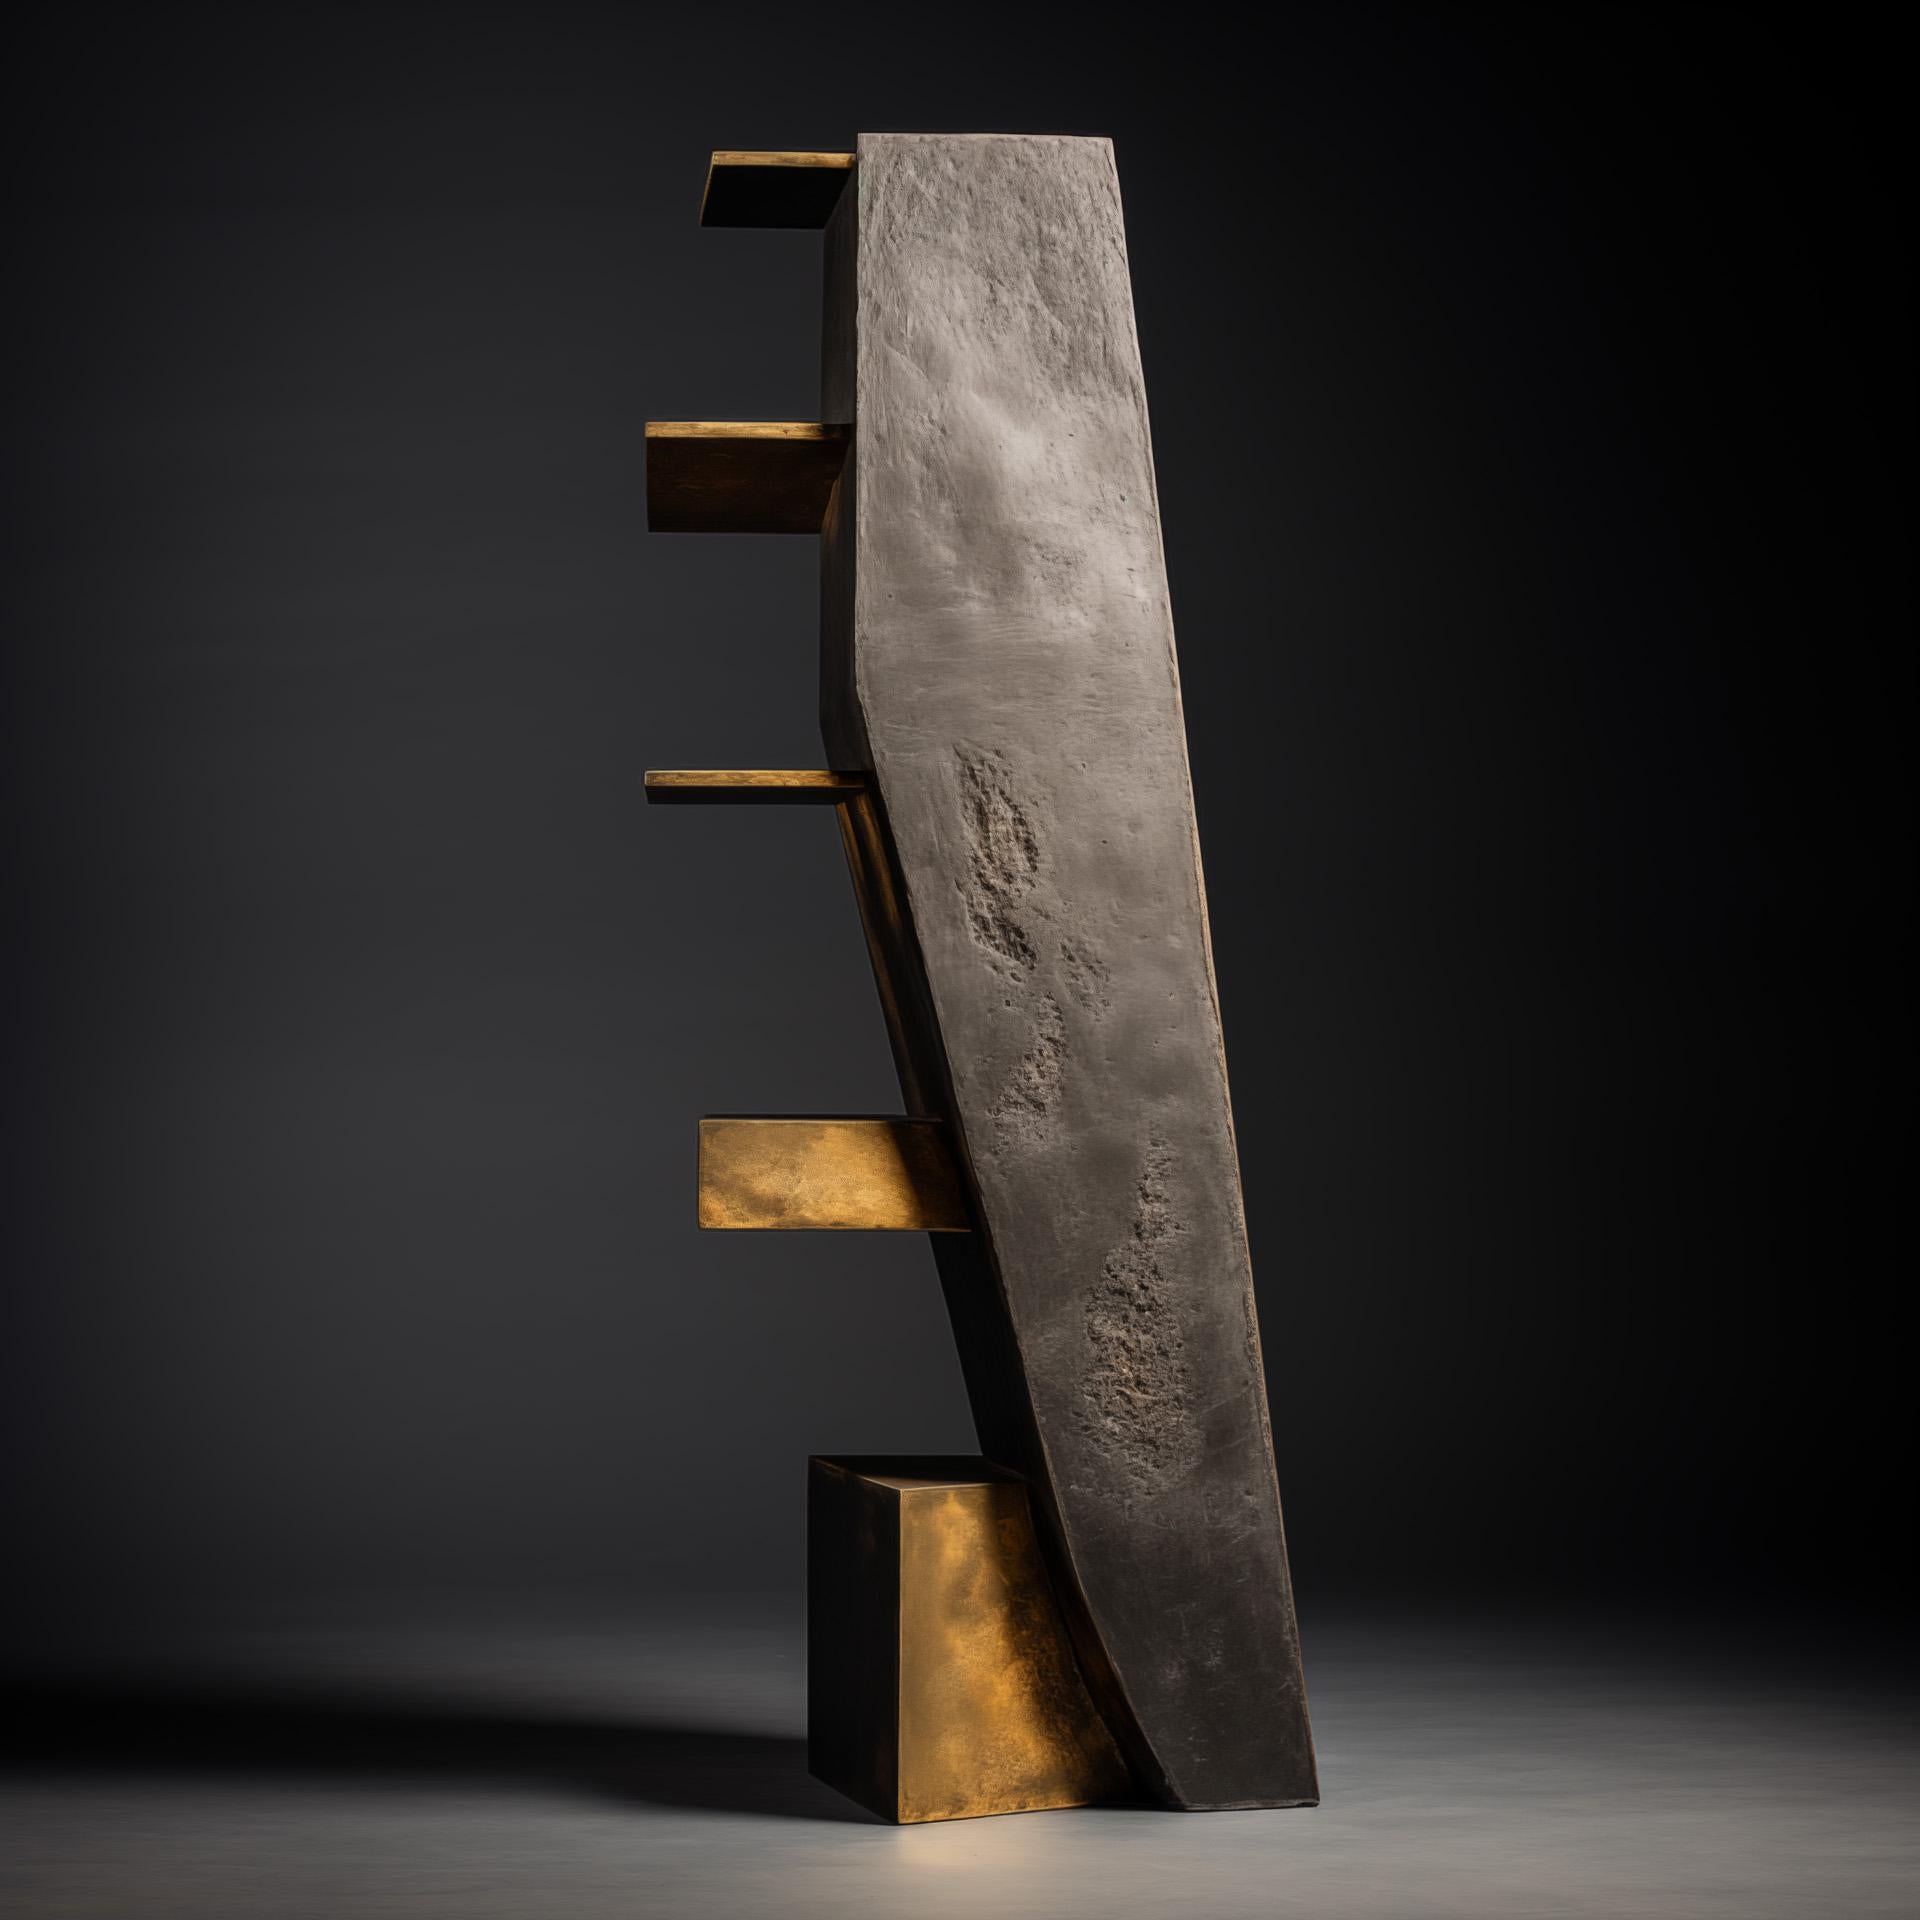 Wen Xue Shelf by objective OBJECT Studio
Dimensions: D 47 x W 81.5 x H 198 cm 
Materials: Concrete, brass.

objective OBJECT
an embodiment of our architectural ethos.

We represent an unwavering dedication to truth, impartiality, and the profound